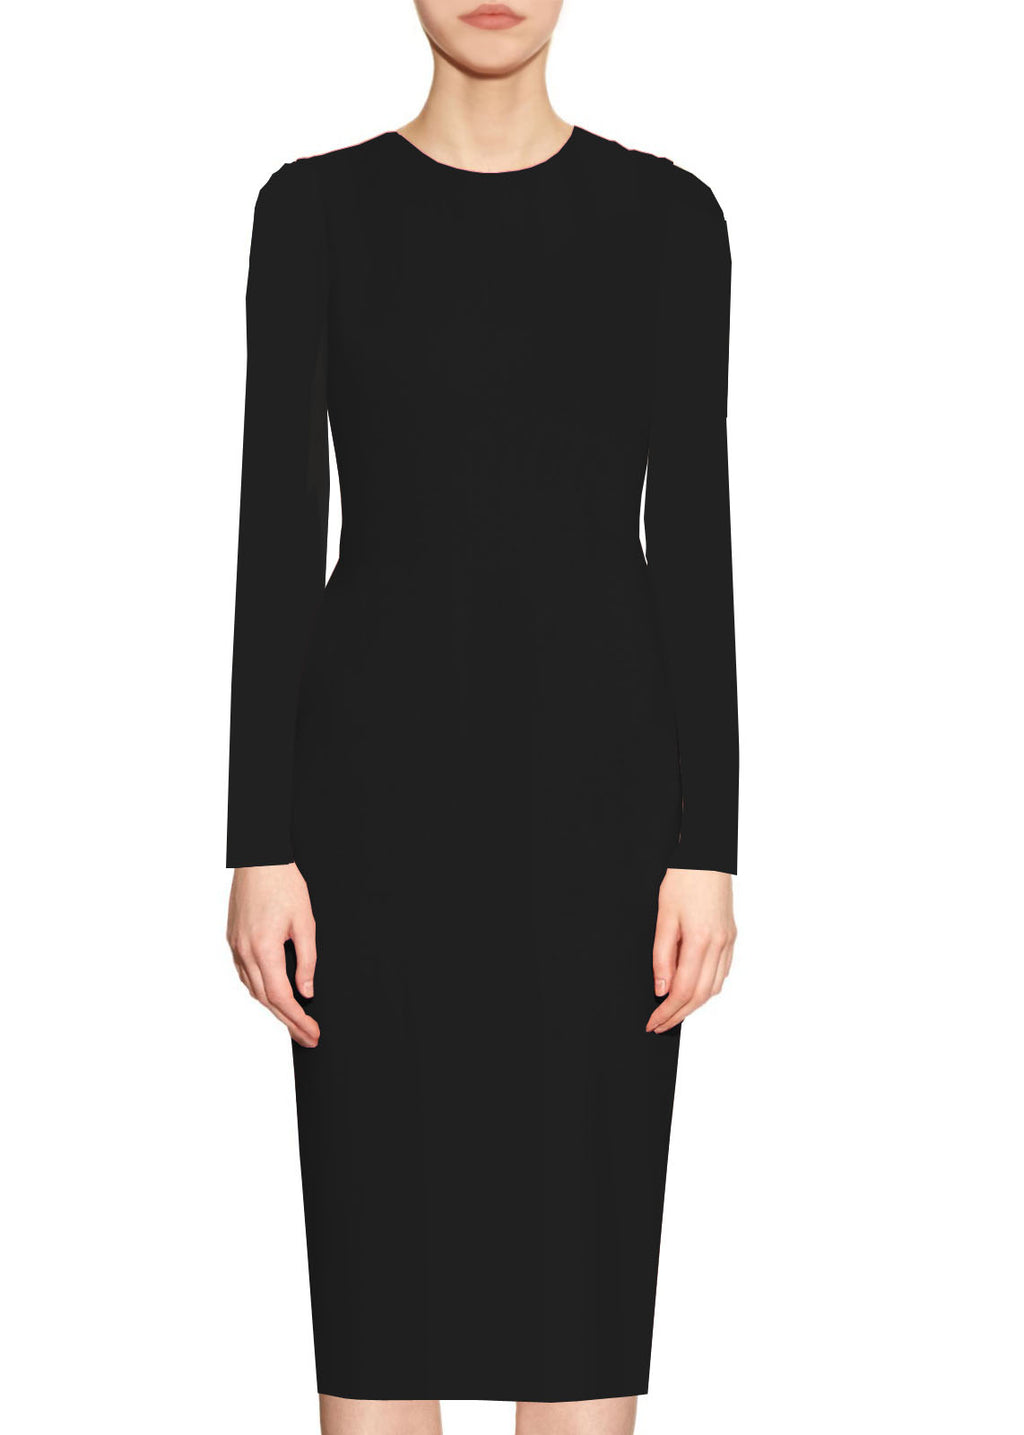 Modest Sheath Dress by CaeliCouture